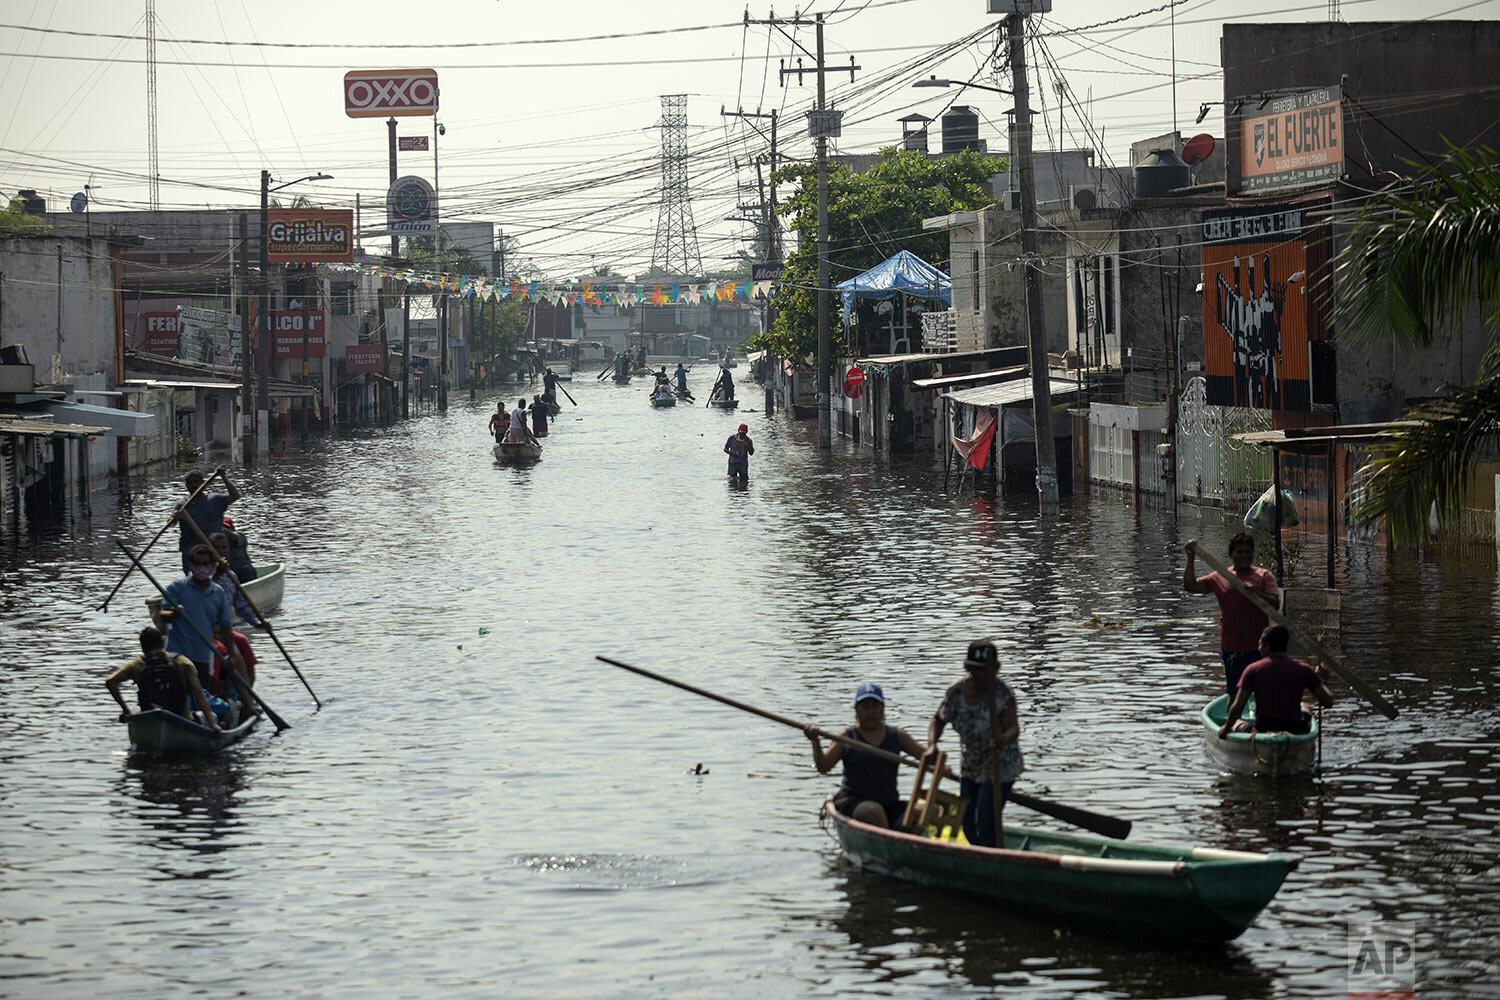  Residents uses boats to navigate the flooded streets in Villahermosa, Mexico, Wednesday, Nov. 11, 2020.  (AP Photo/Felix Marquez) 